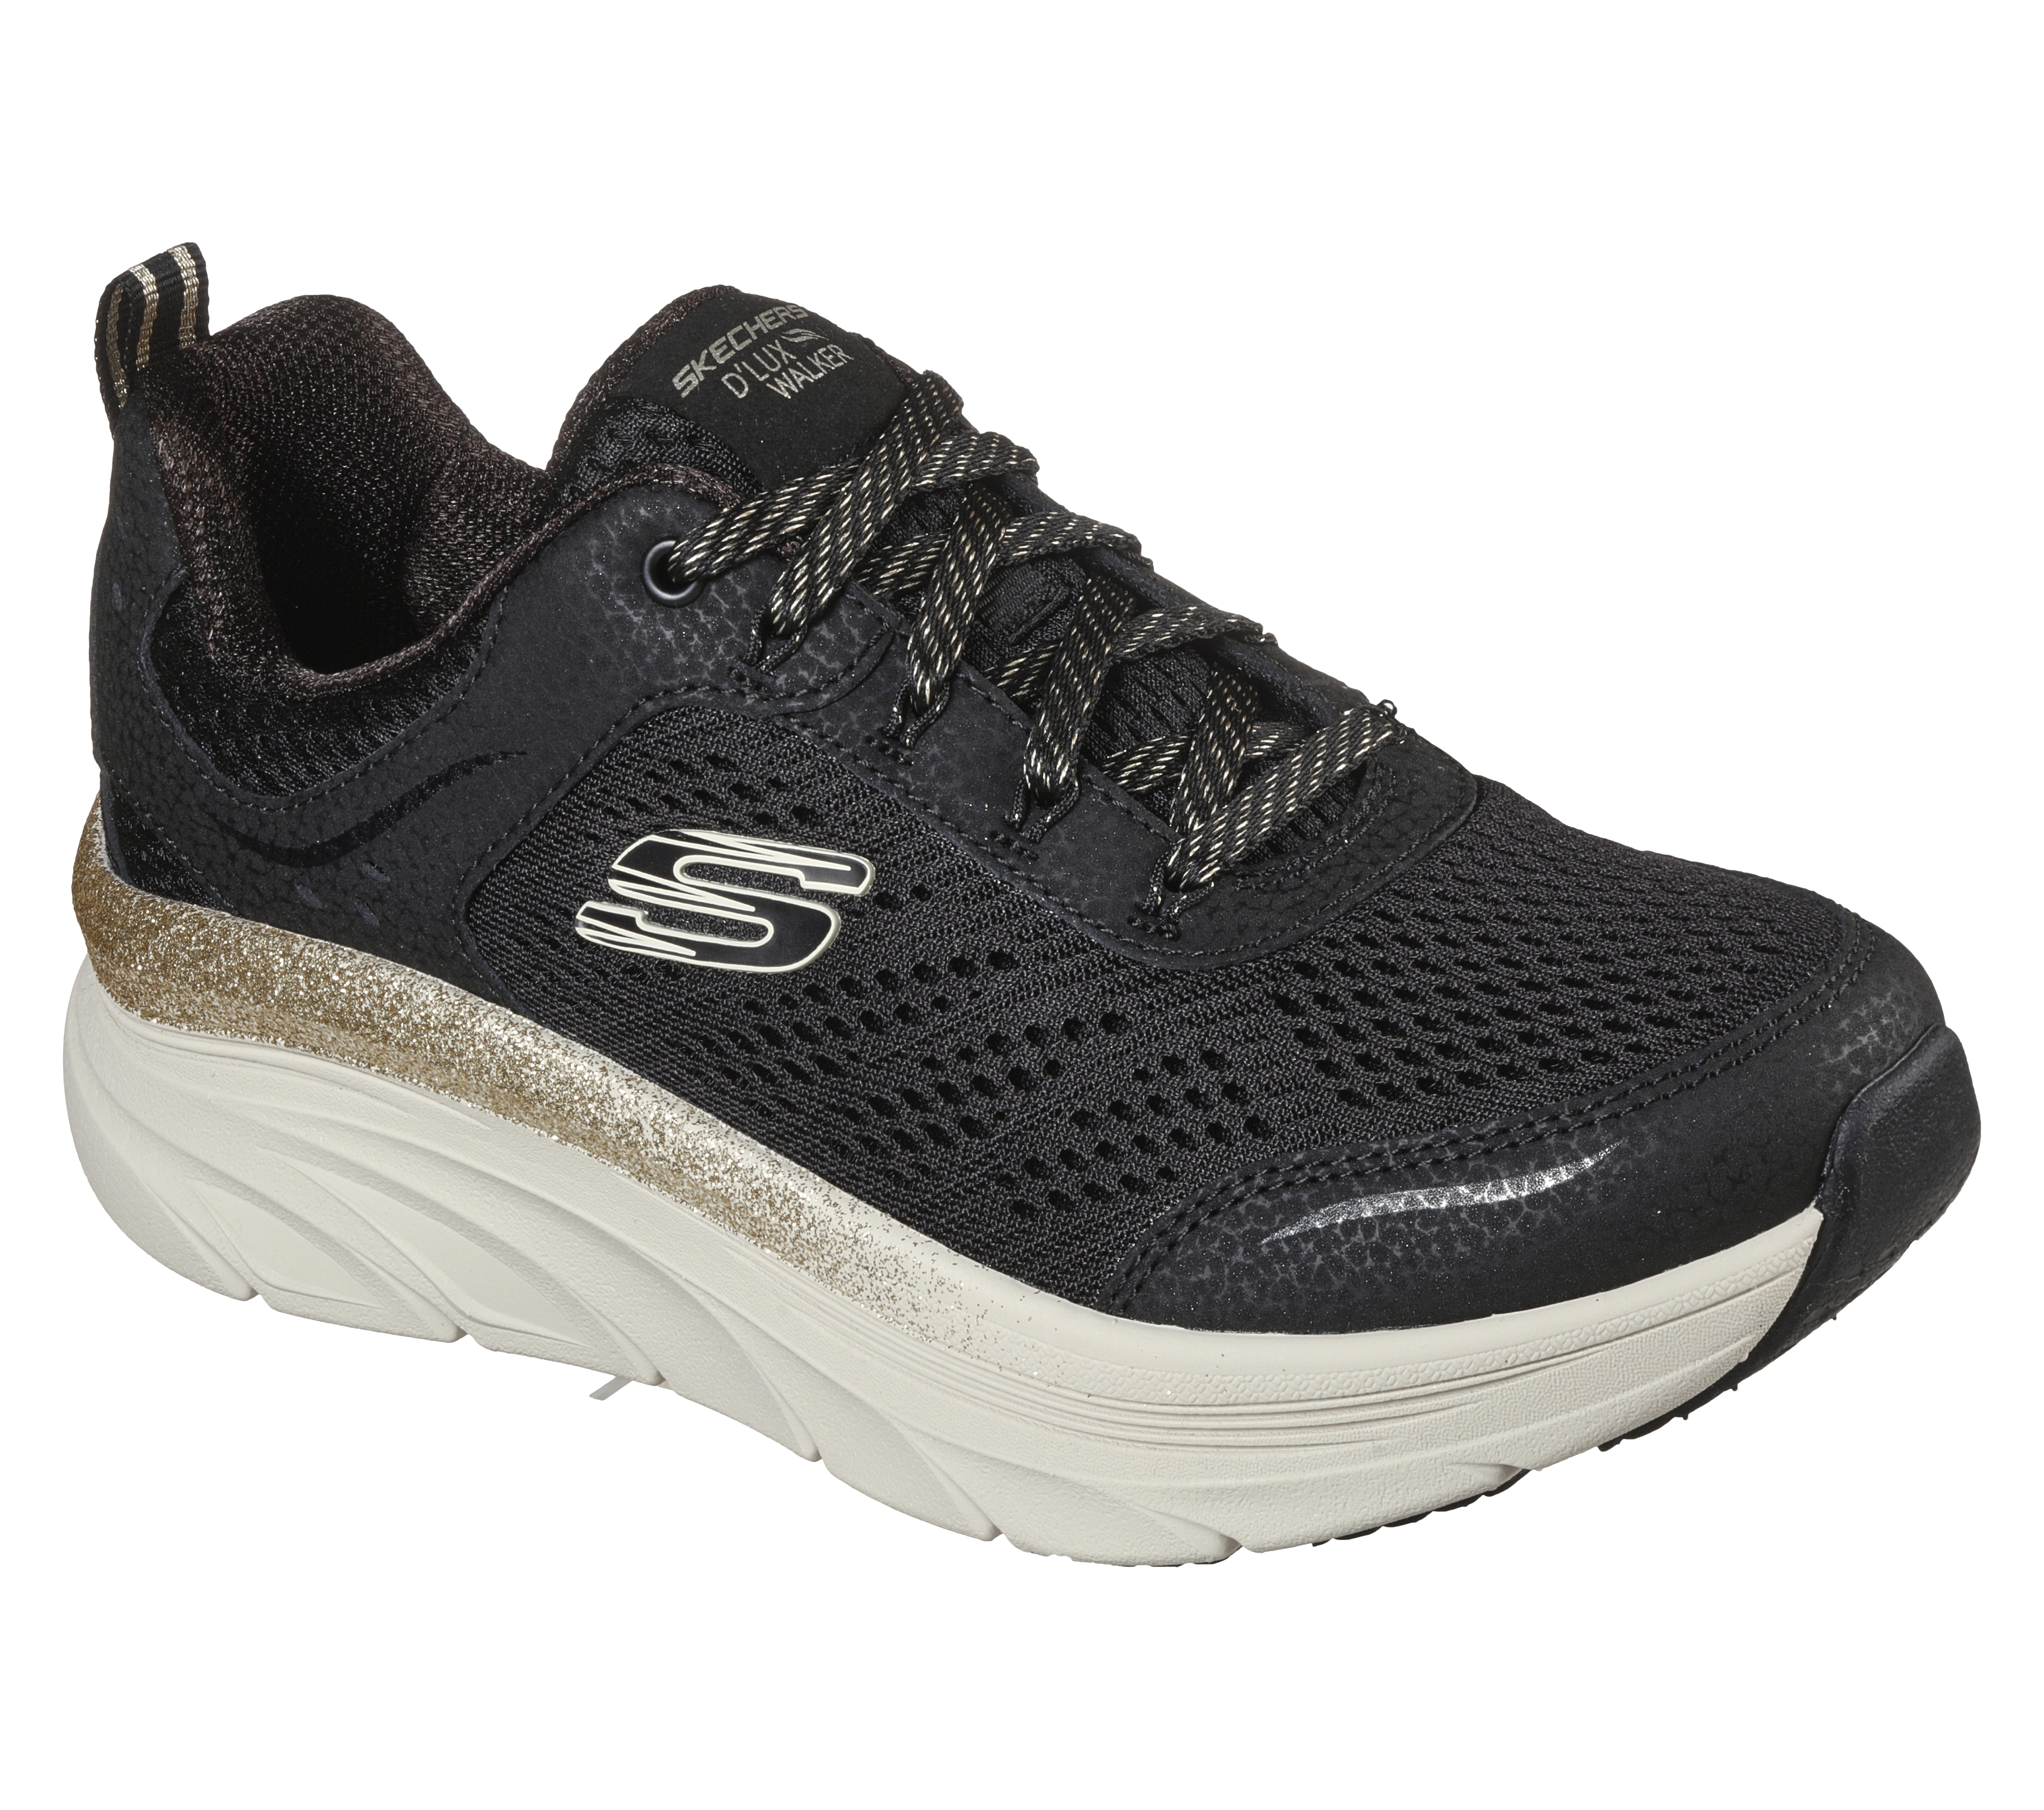 Shop the Relaxed Fit: D'Lux Walker - Glorious Motion | SKECHERS